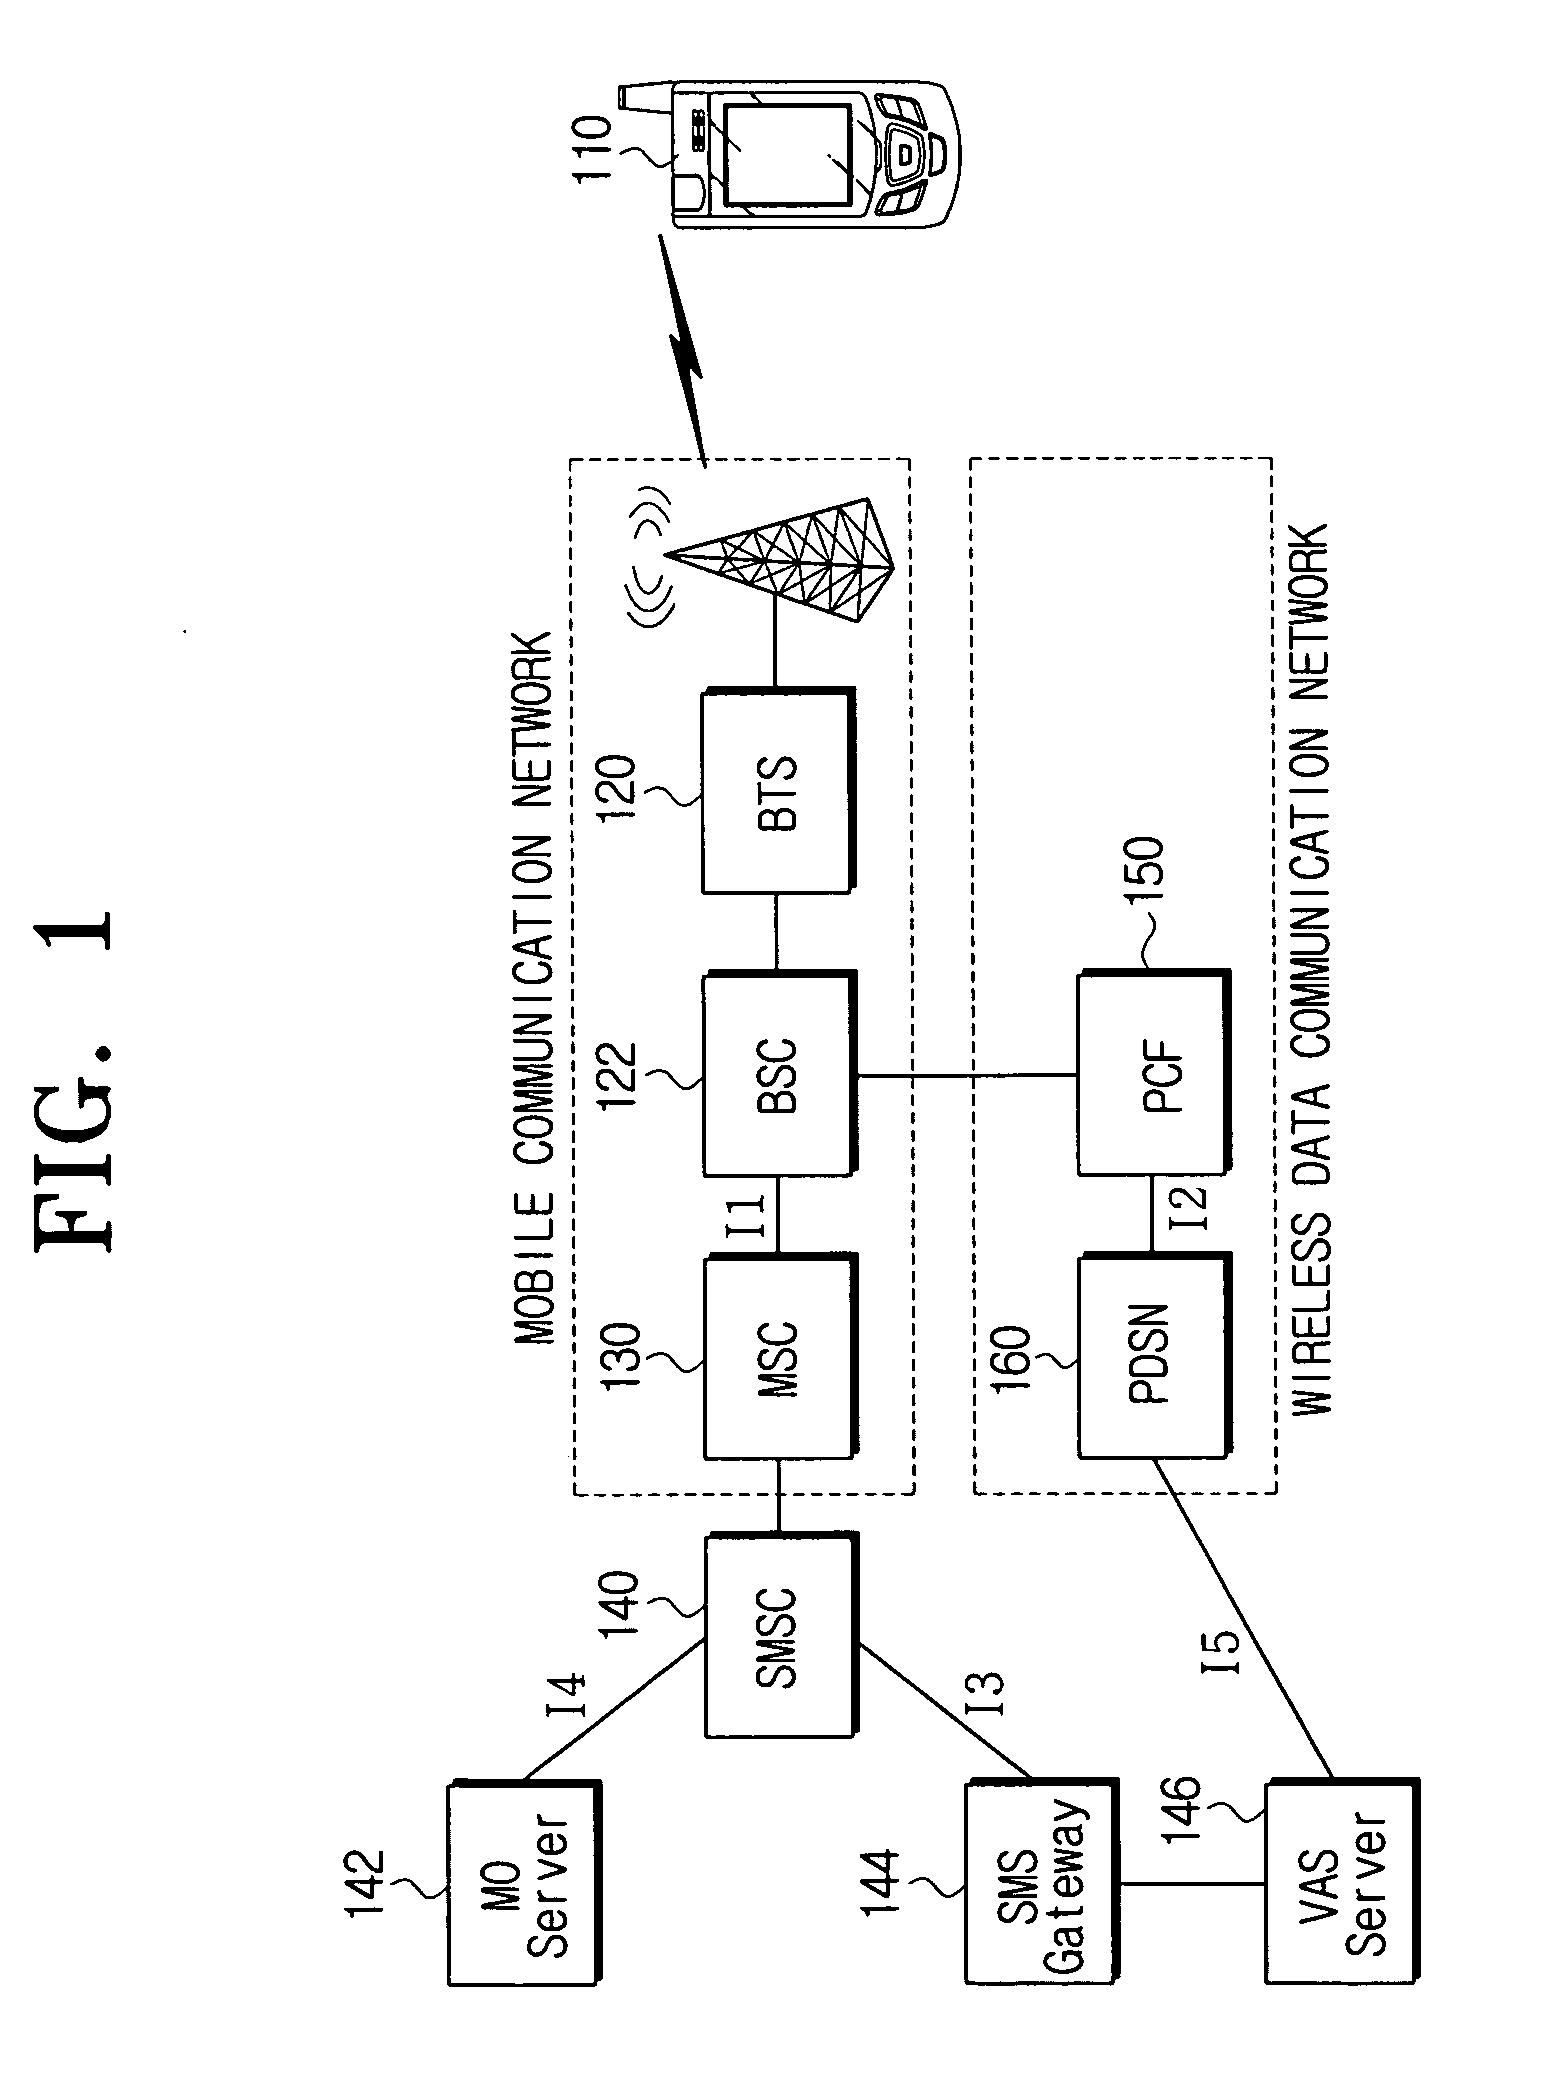 Short message processing method and apparatus